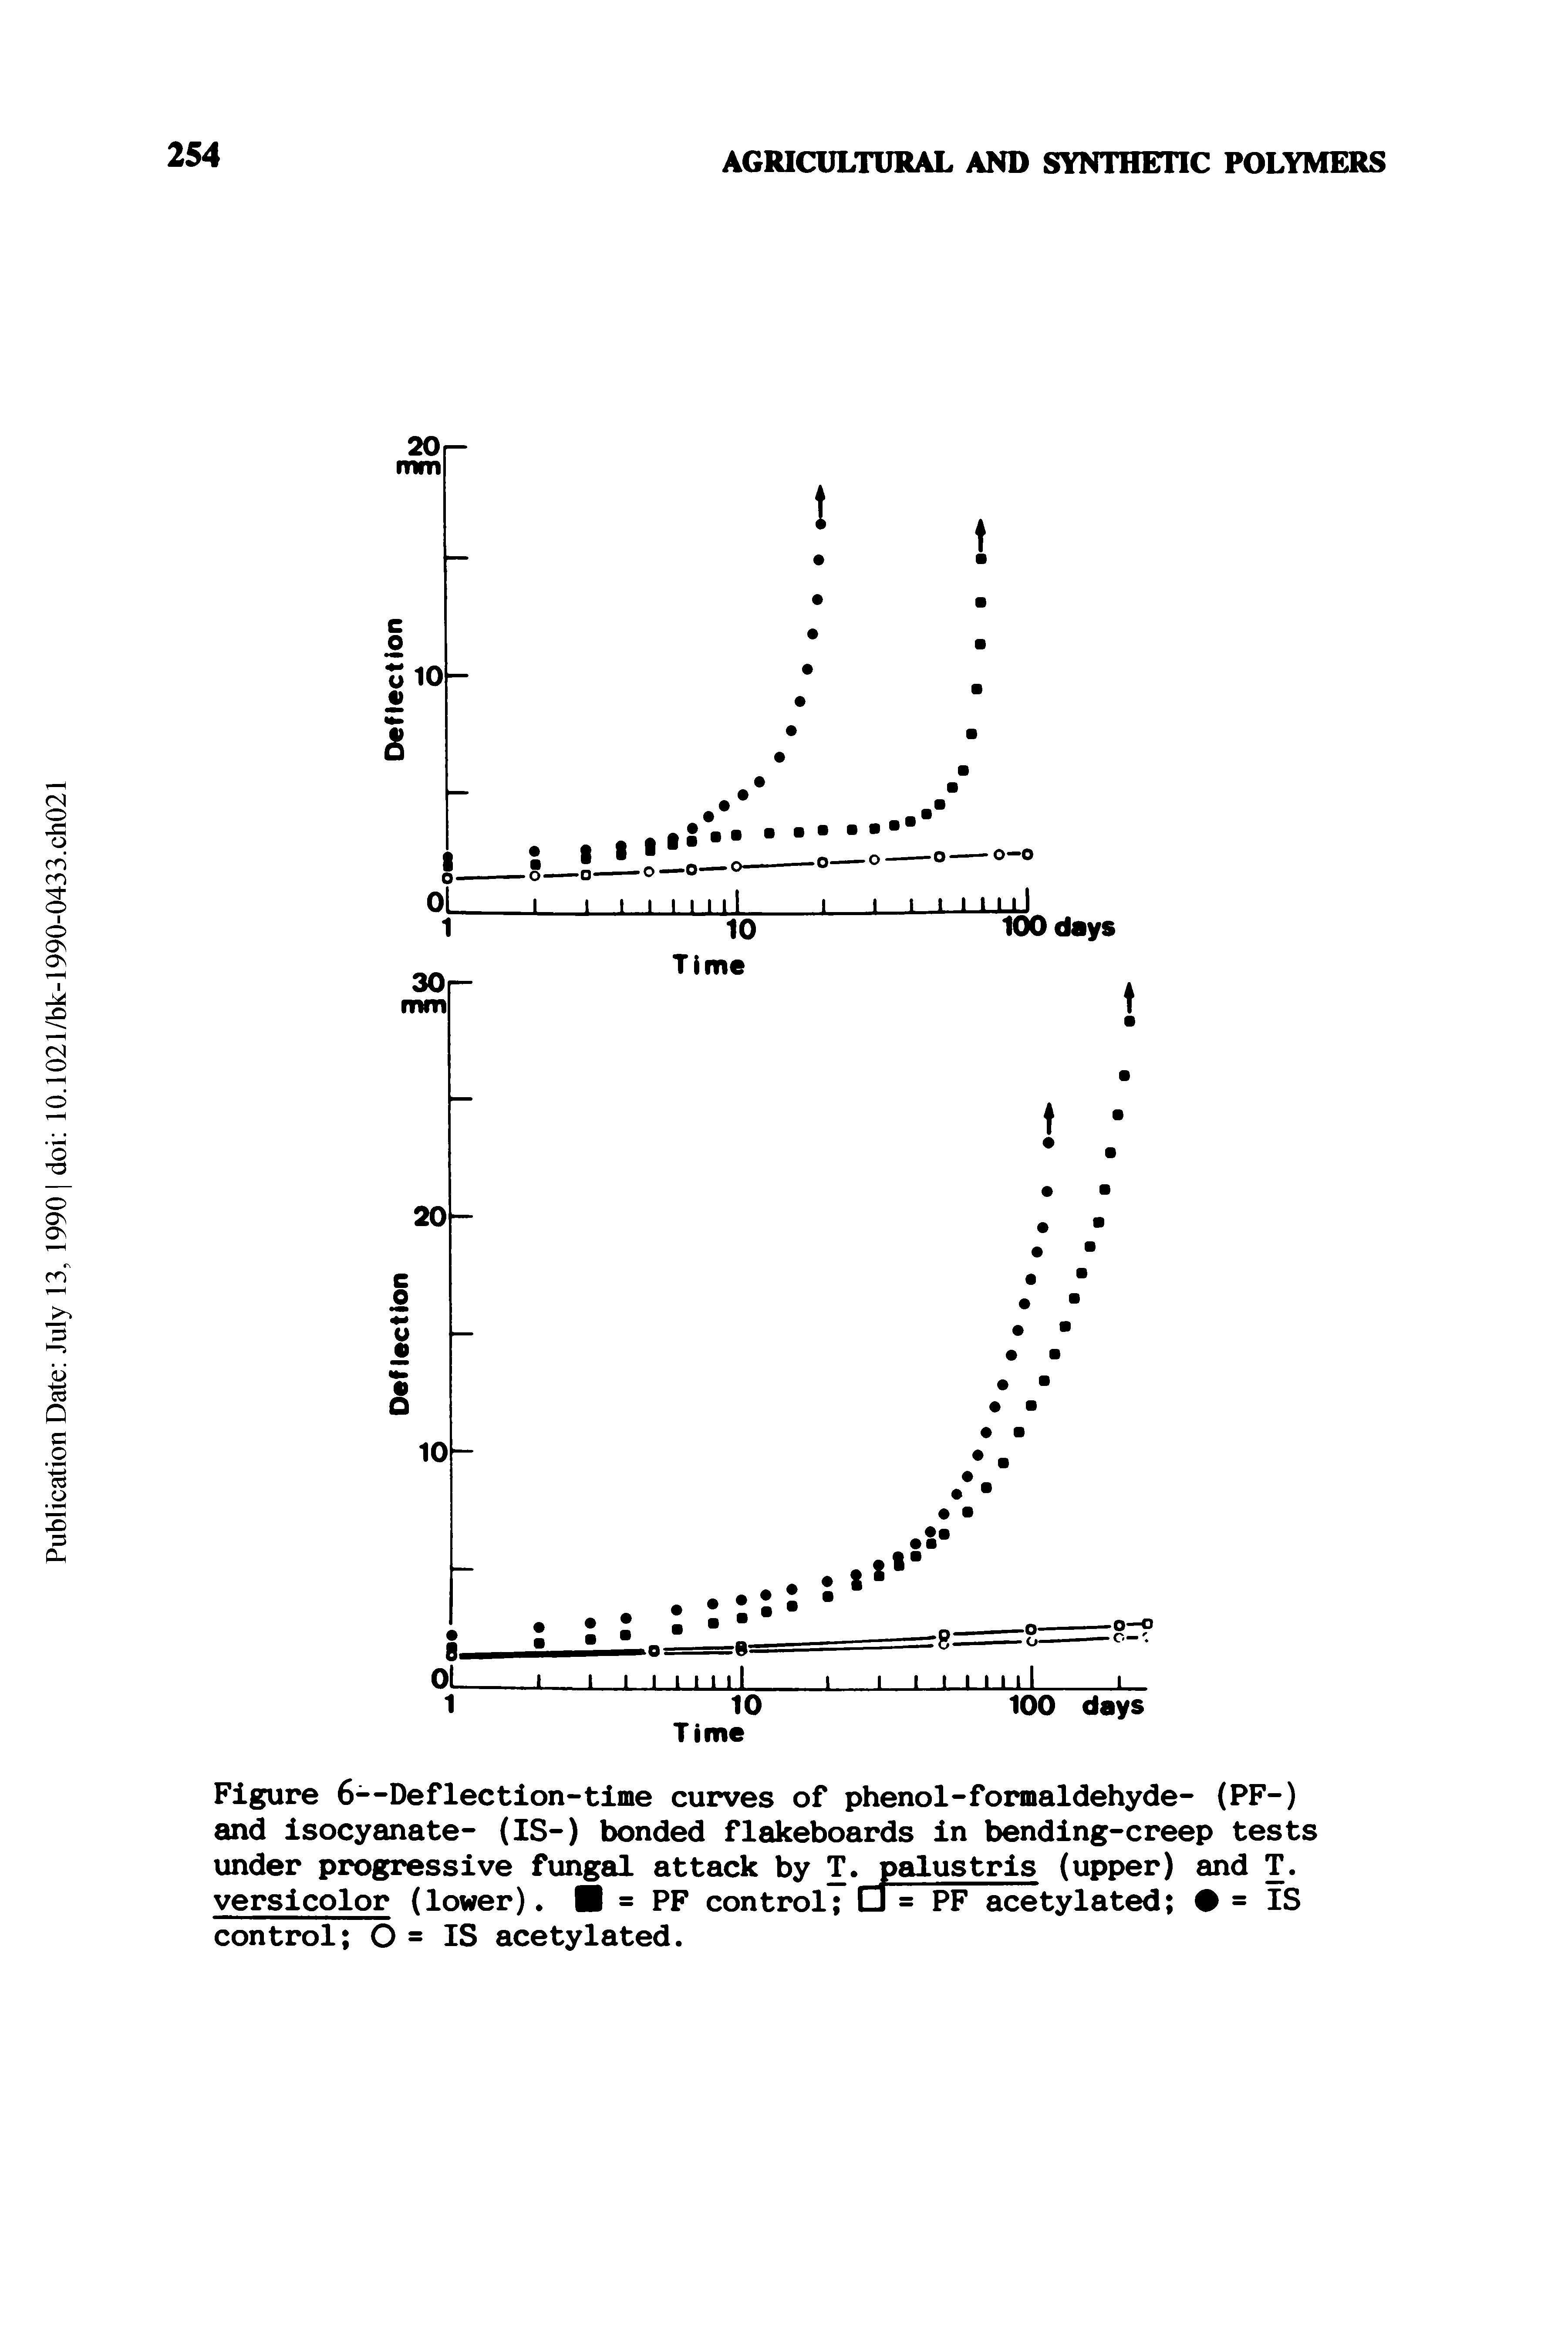 Figure 6--Deflection-time curves of phenol-formaldehyde- (PF-) and isocyanate- (IS-) bonded flakeboards in bending-creep tests under progressive fungal attack by T. palustris (upper) and T. versicolor (lower). = PF control = PF acetylated = IS control O = IS acetylated.